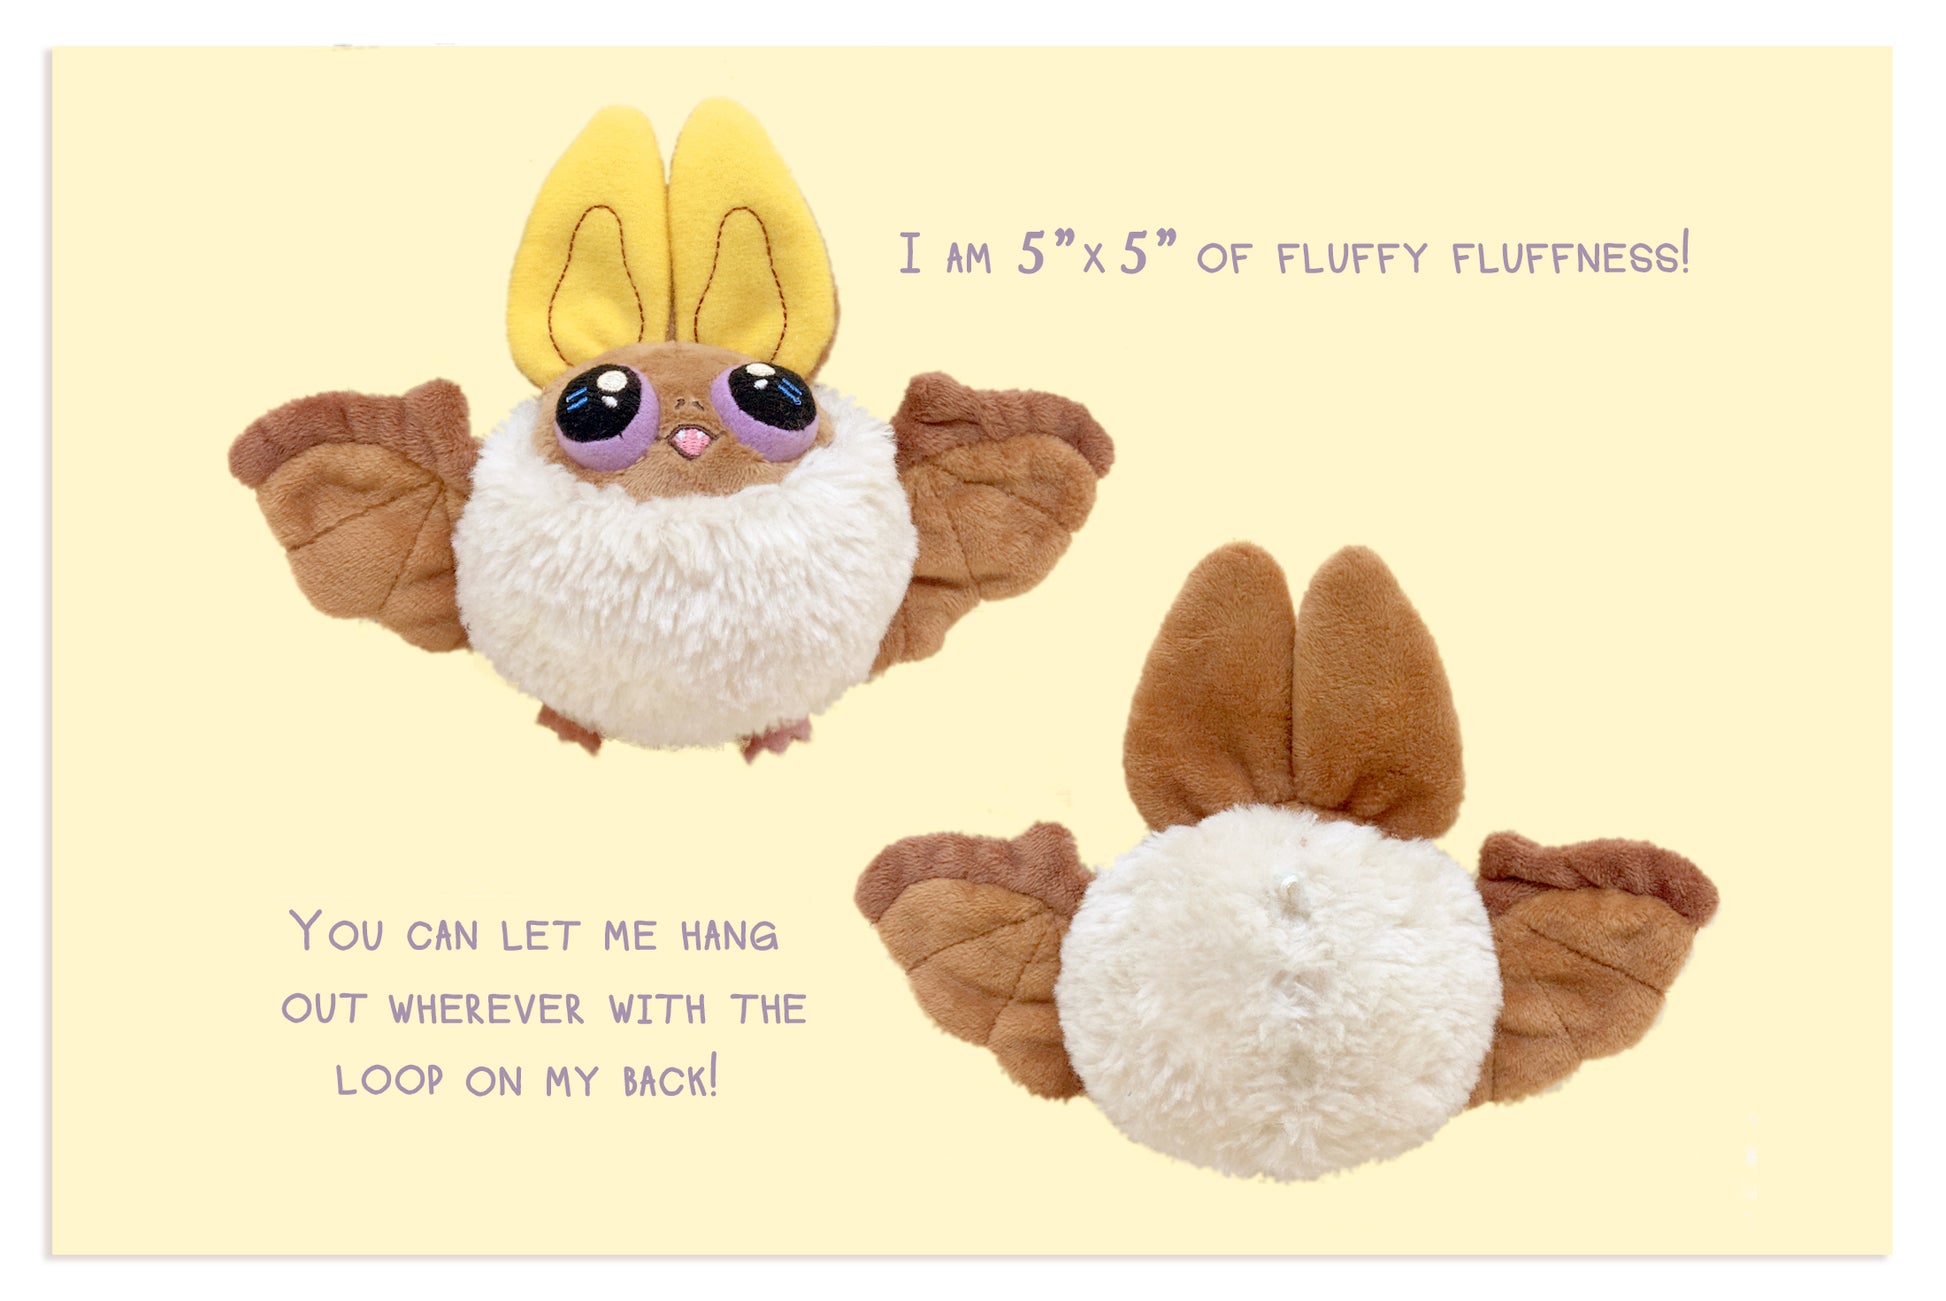 Back and Front view of brown Fwoof the bat plush on yellow background. Text reads: "I am 5 inches by 5 inches of fluffy fluffness! You can let me hang out wherever with the loop on my back!"